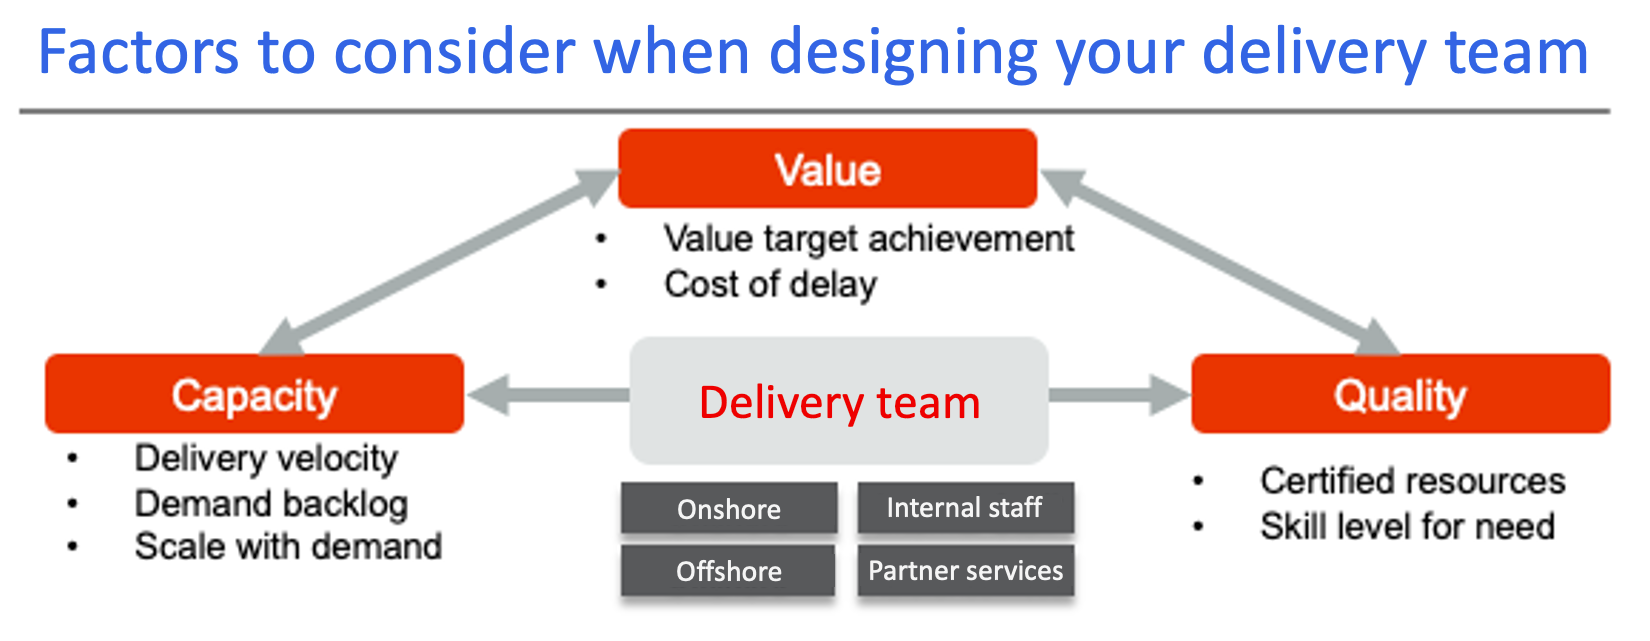 Factors to consider when designing automation delivery team